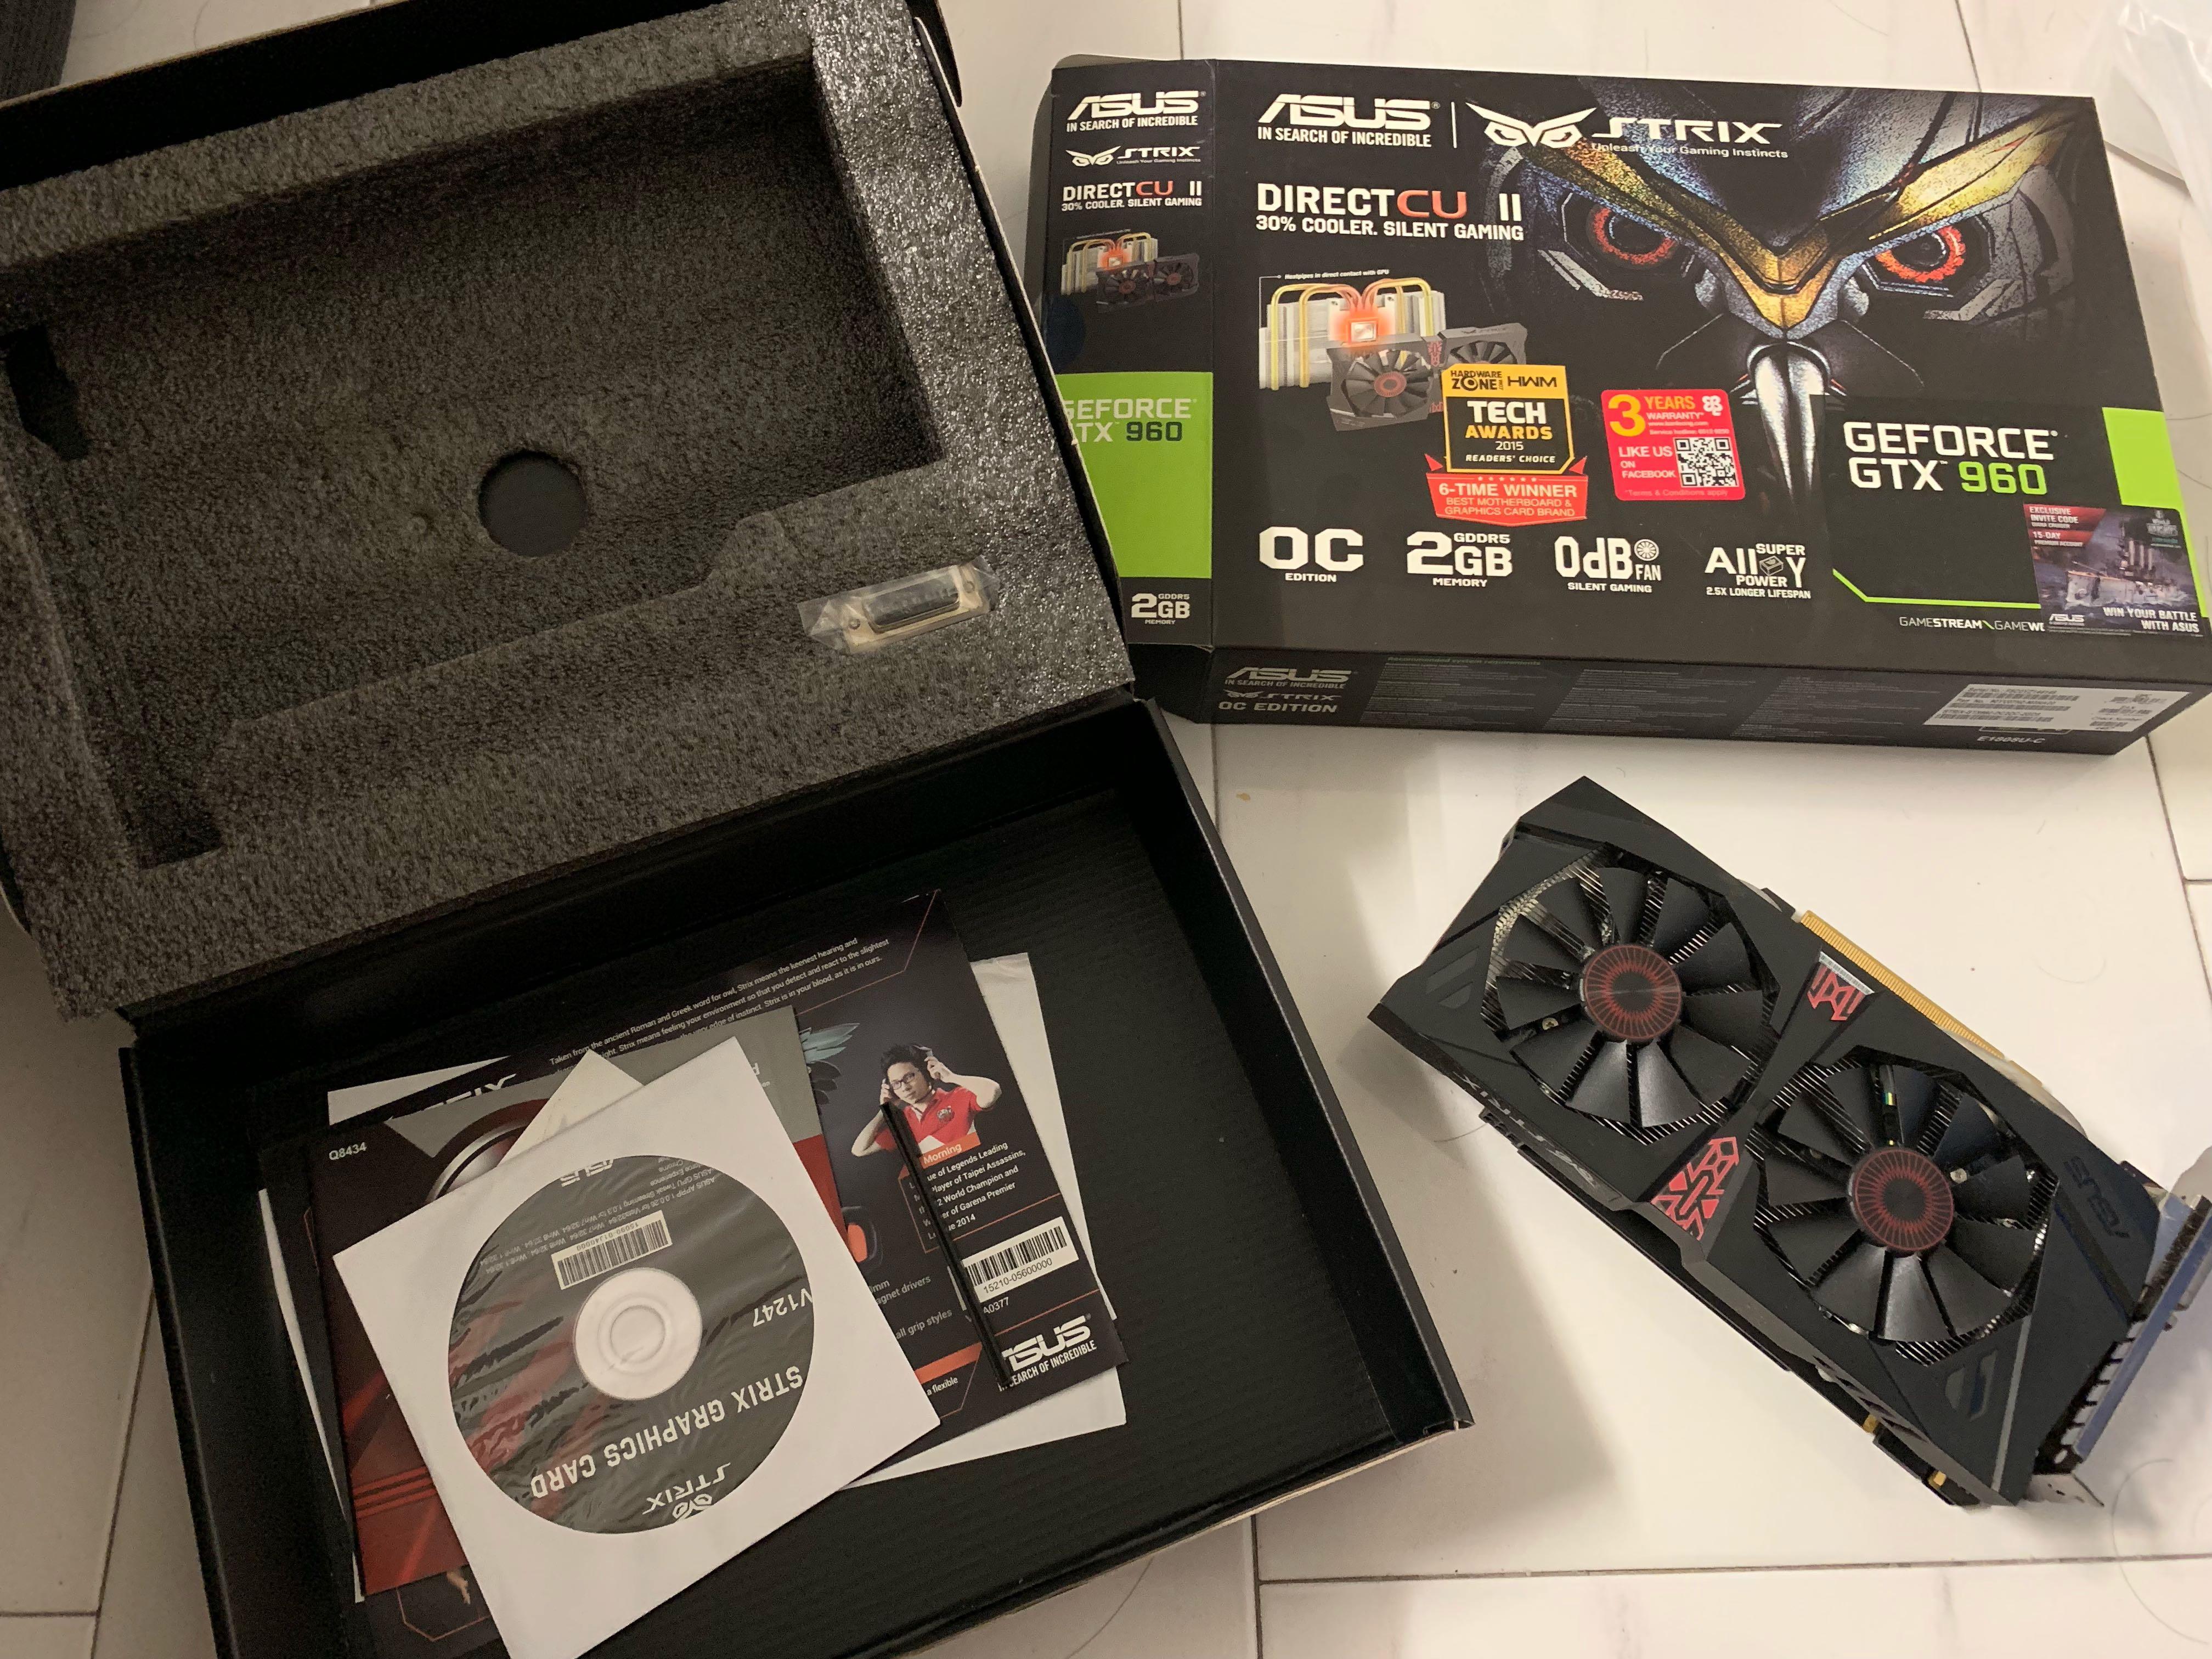 Asus Strix Gtx 960 2gb Oc Edition Computers Tech Parts Accessories Computer Parts On Carousell